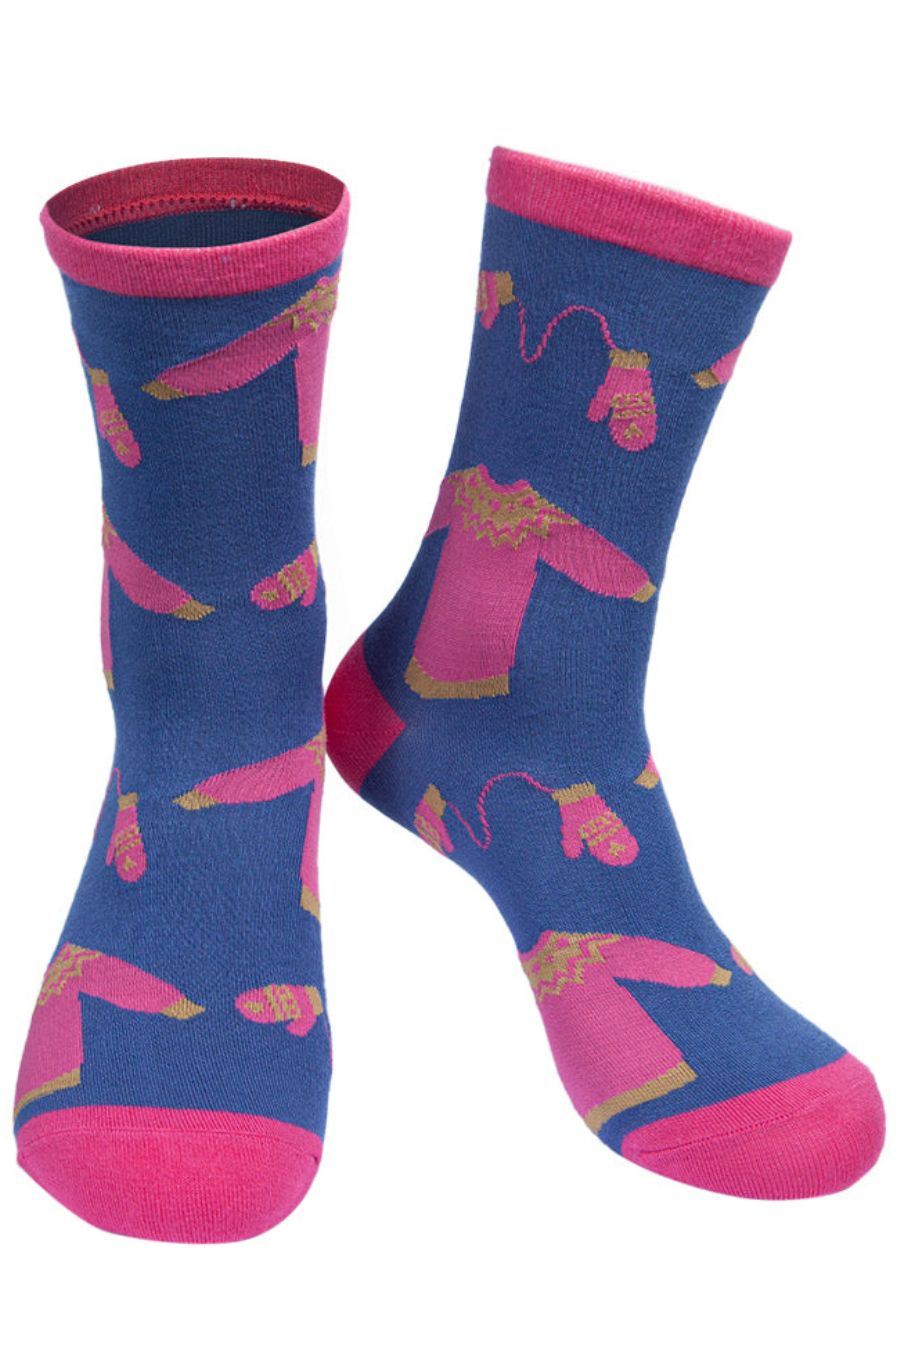 blue and pink bamboo socks featuring a christmas sweater and hat pattern